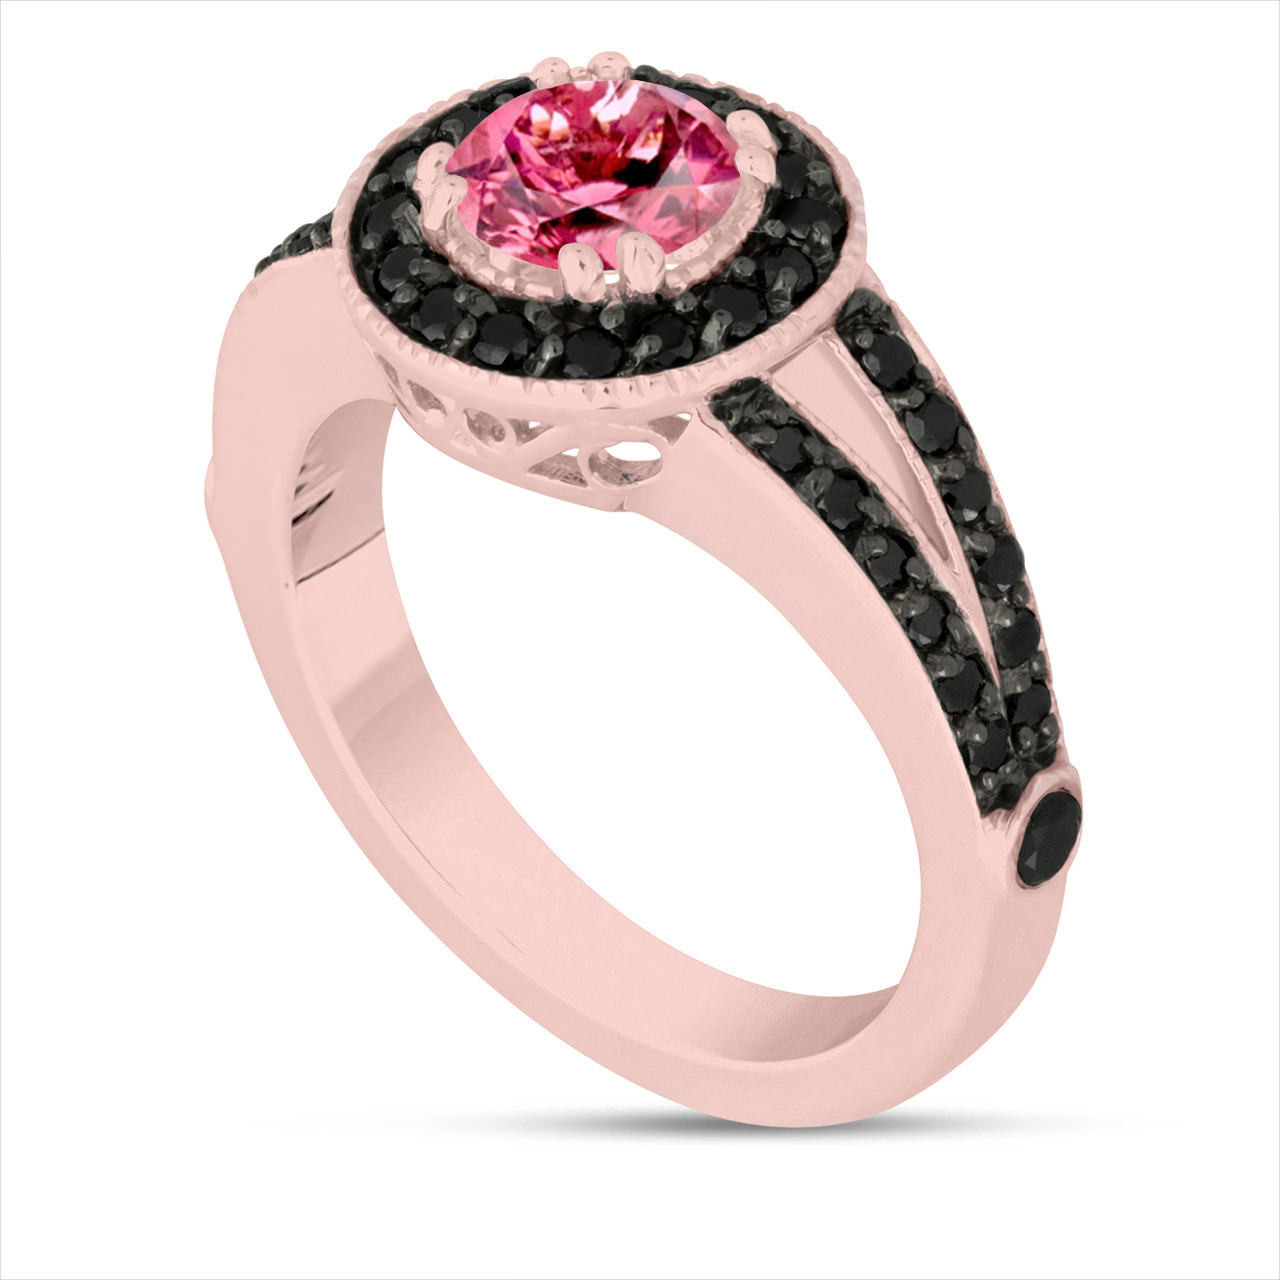 Pink And Black Diamond Wedding Rings
 22 Black and Pink Wedding Rings Designs Trends